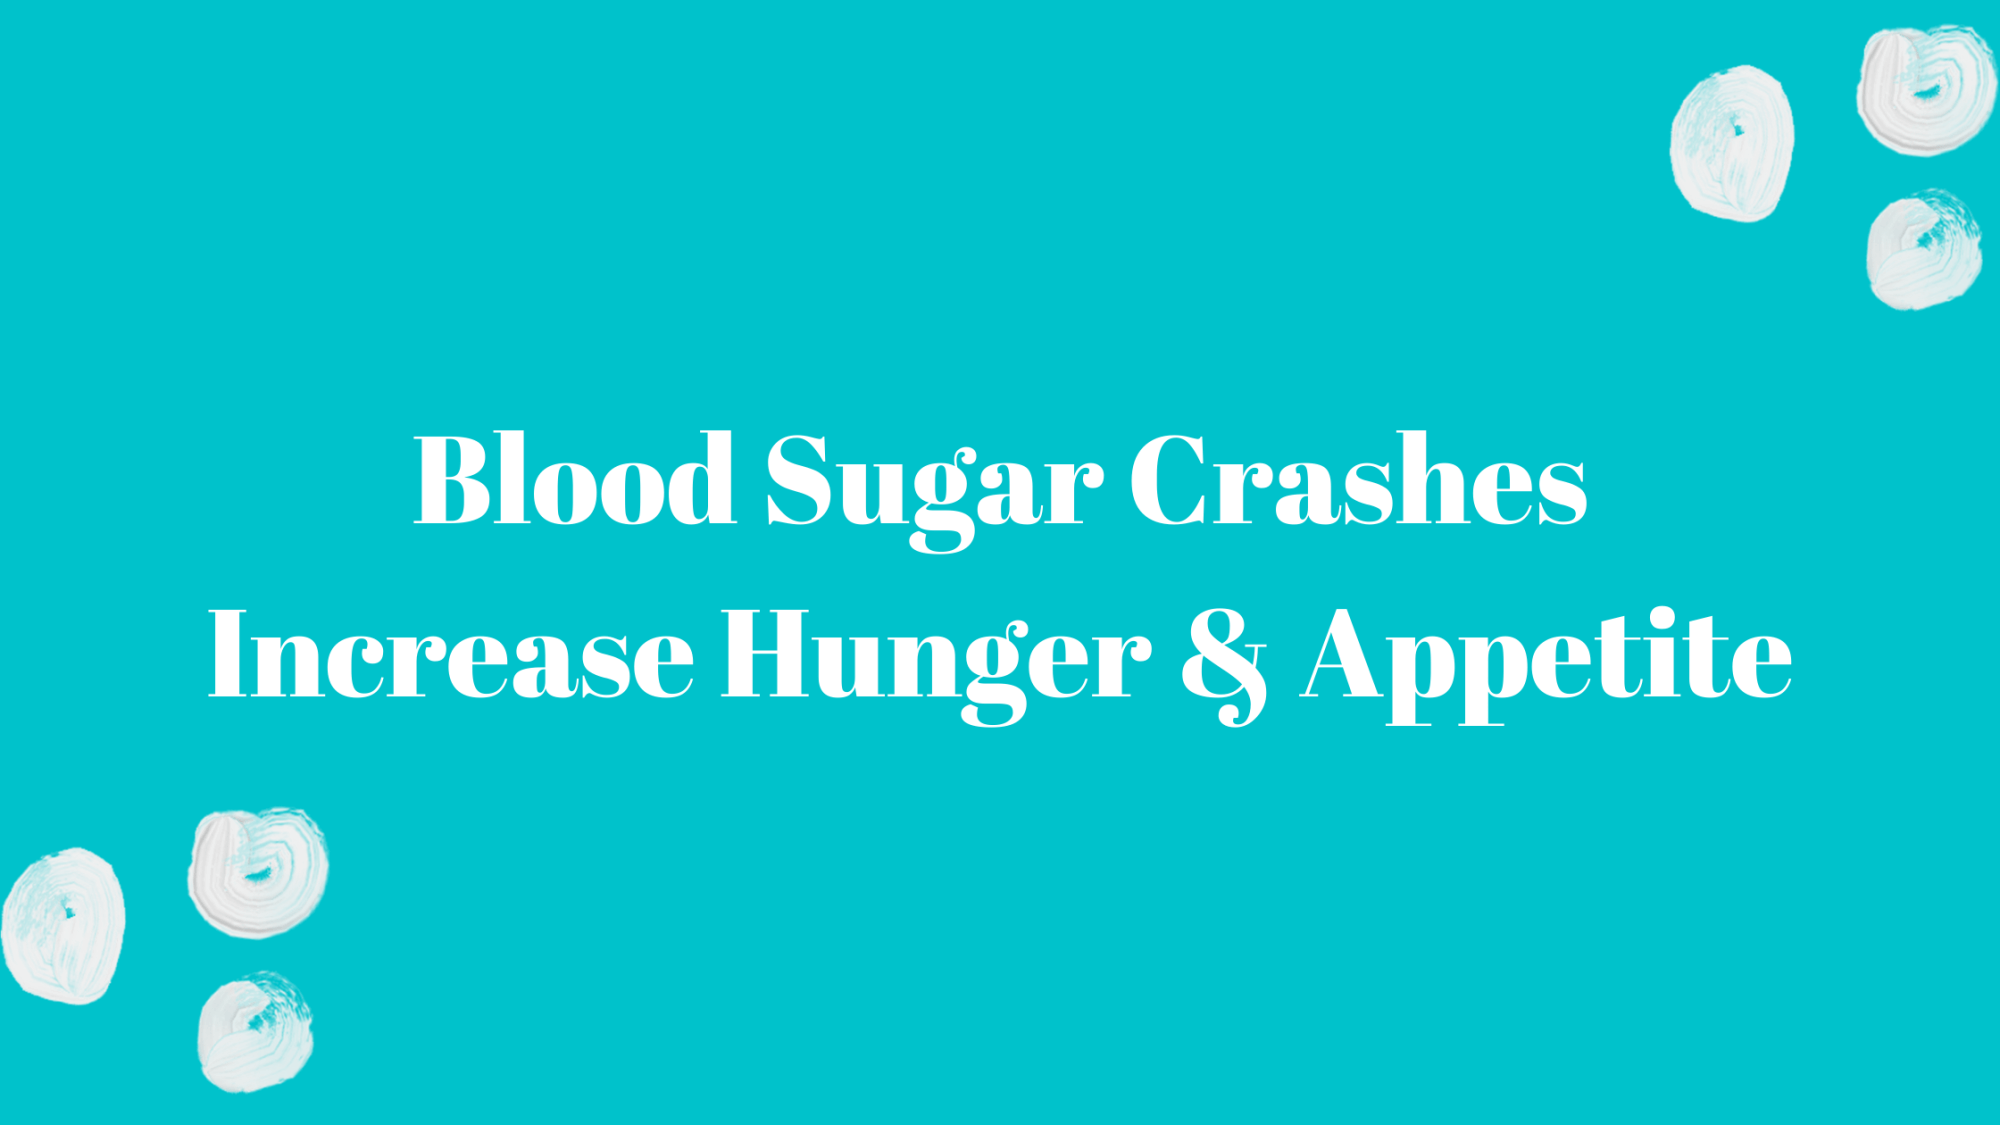 Hunger Increases with Blood Sugar Crashes by Functional Nutritionist Andrea Nicholson